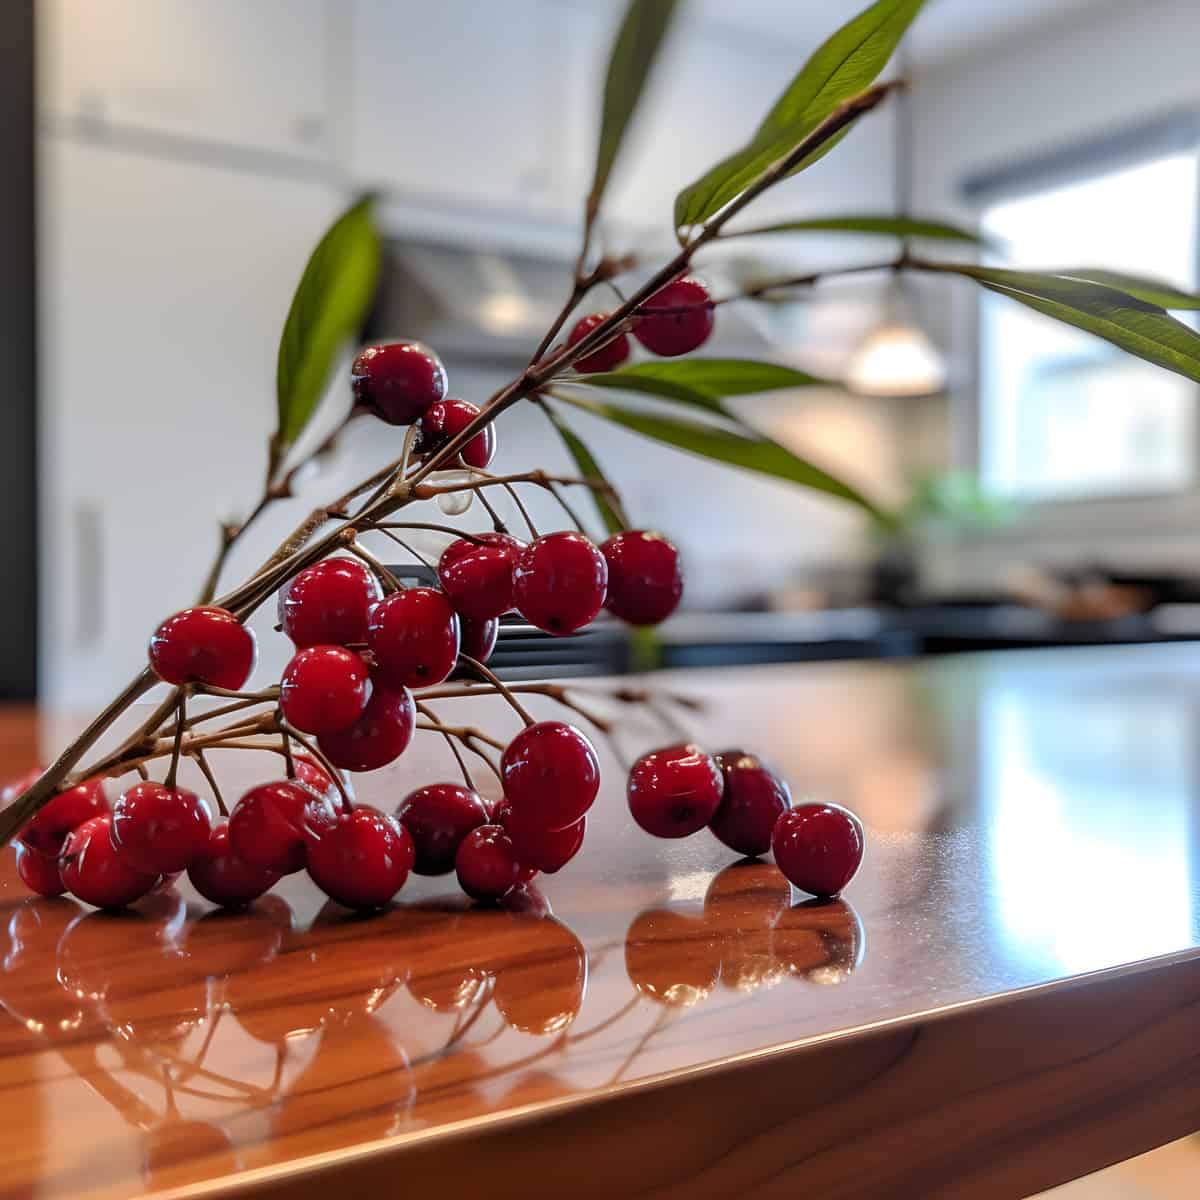 Willow Leaf Cherries on a kitchen counter